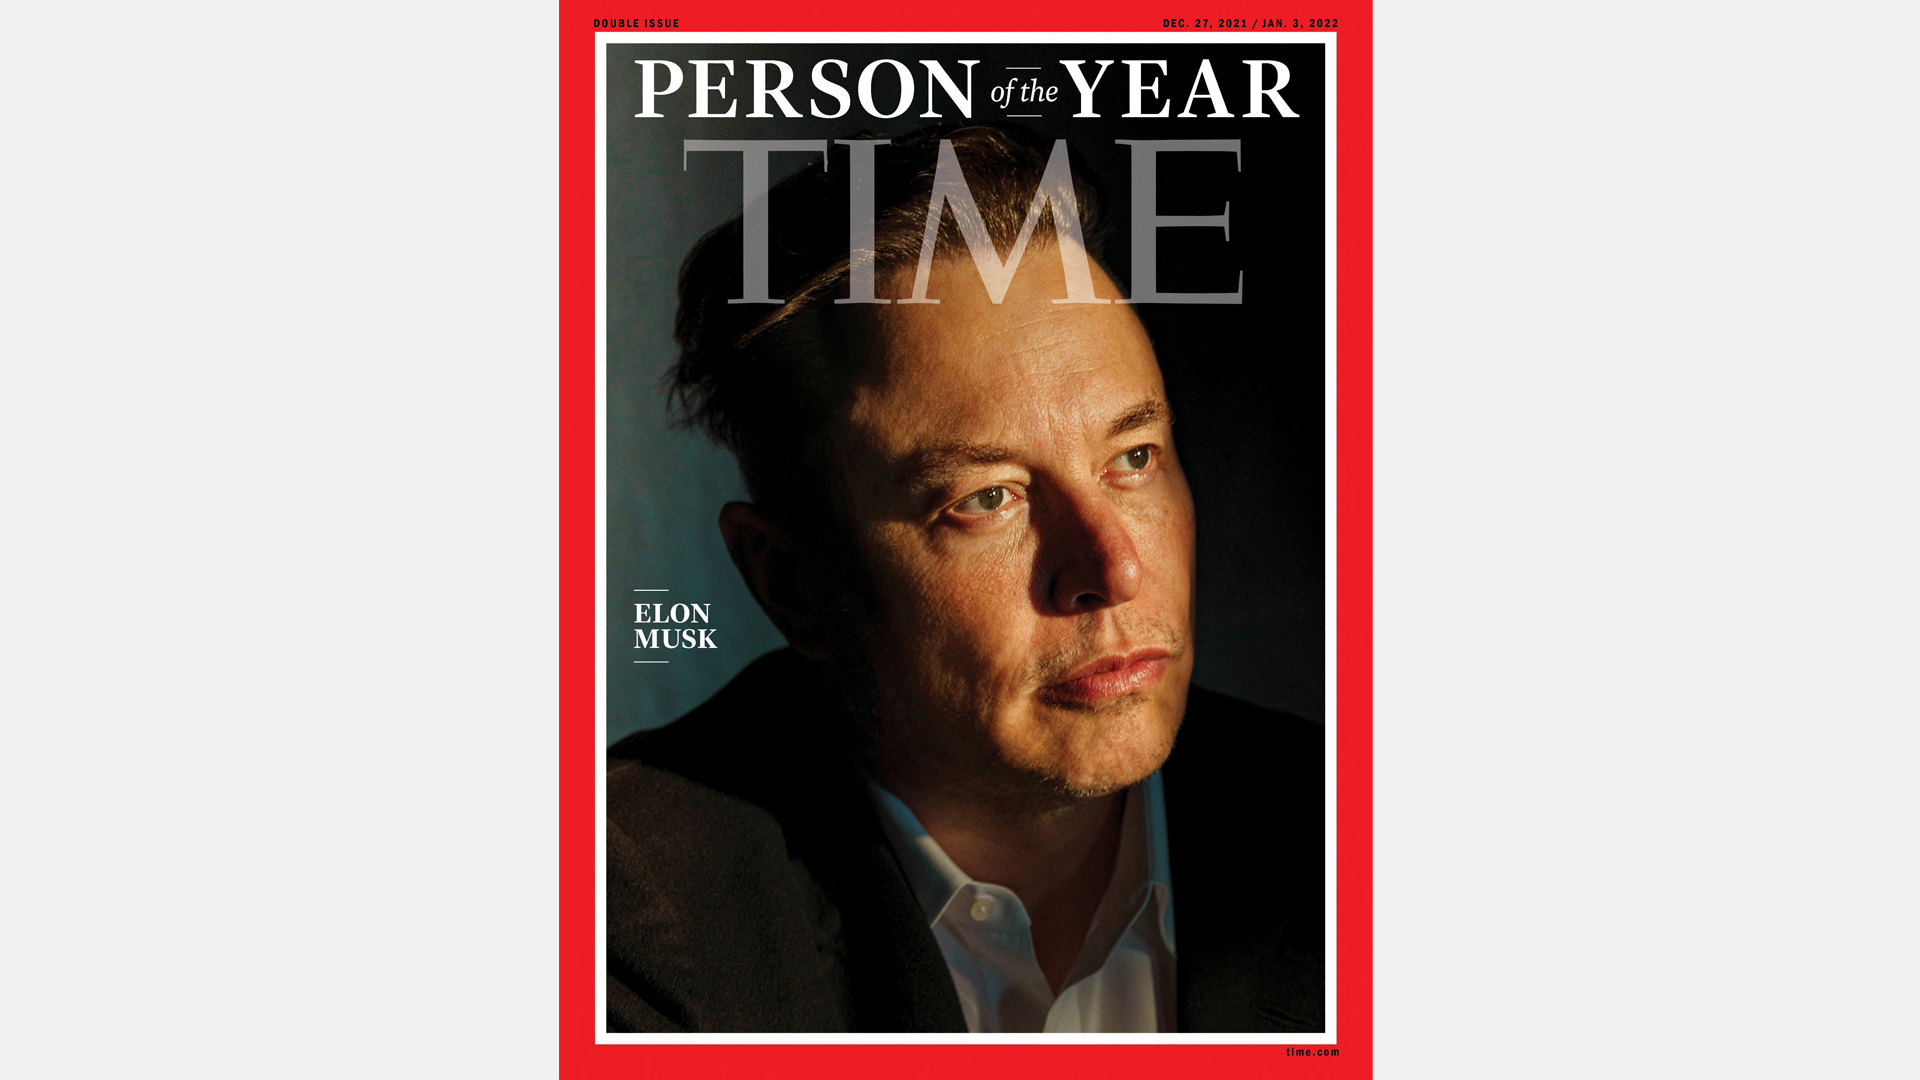 Das Cover des Time Magazines mit Elon Musk als Person of the Year. | via REUTERS